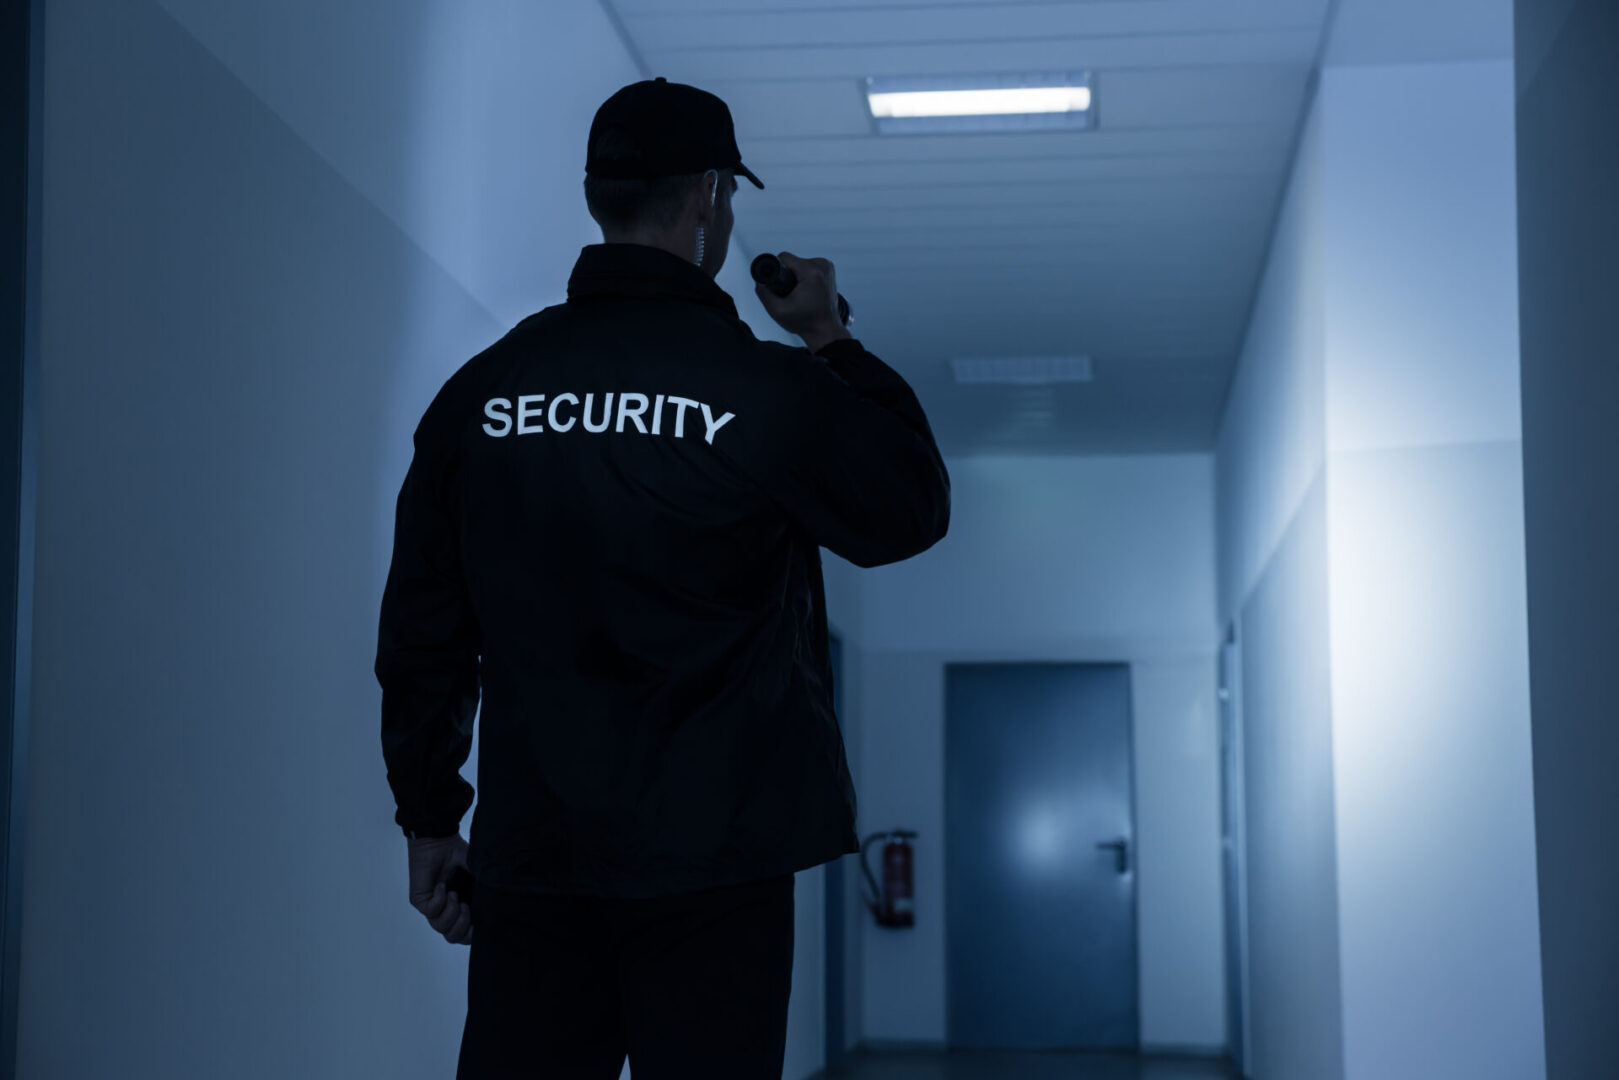 A security guard is standing in the hallway of an office building.